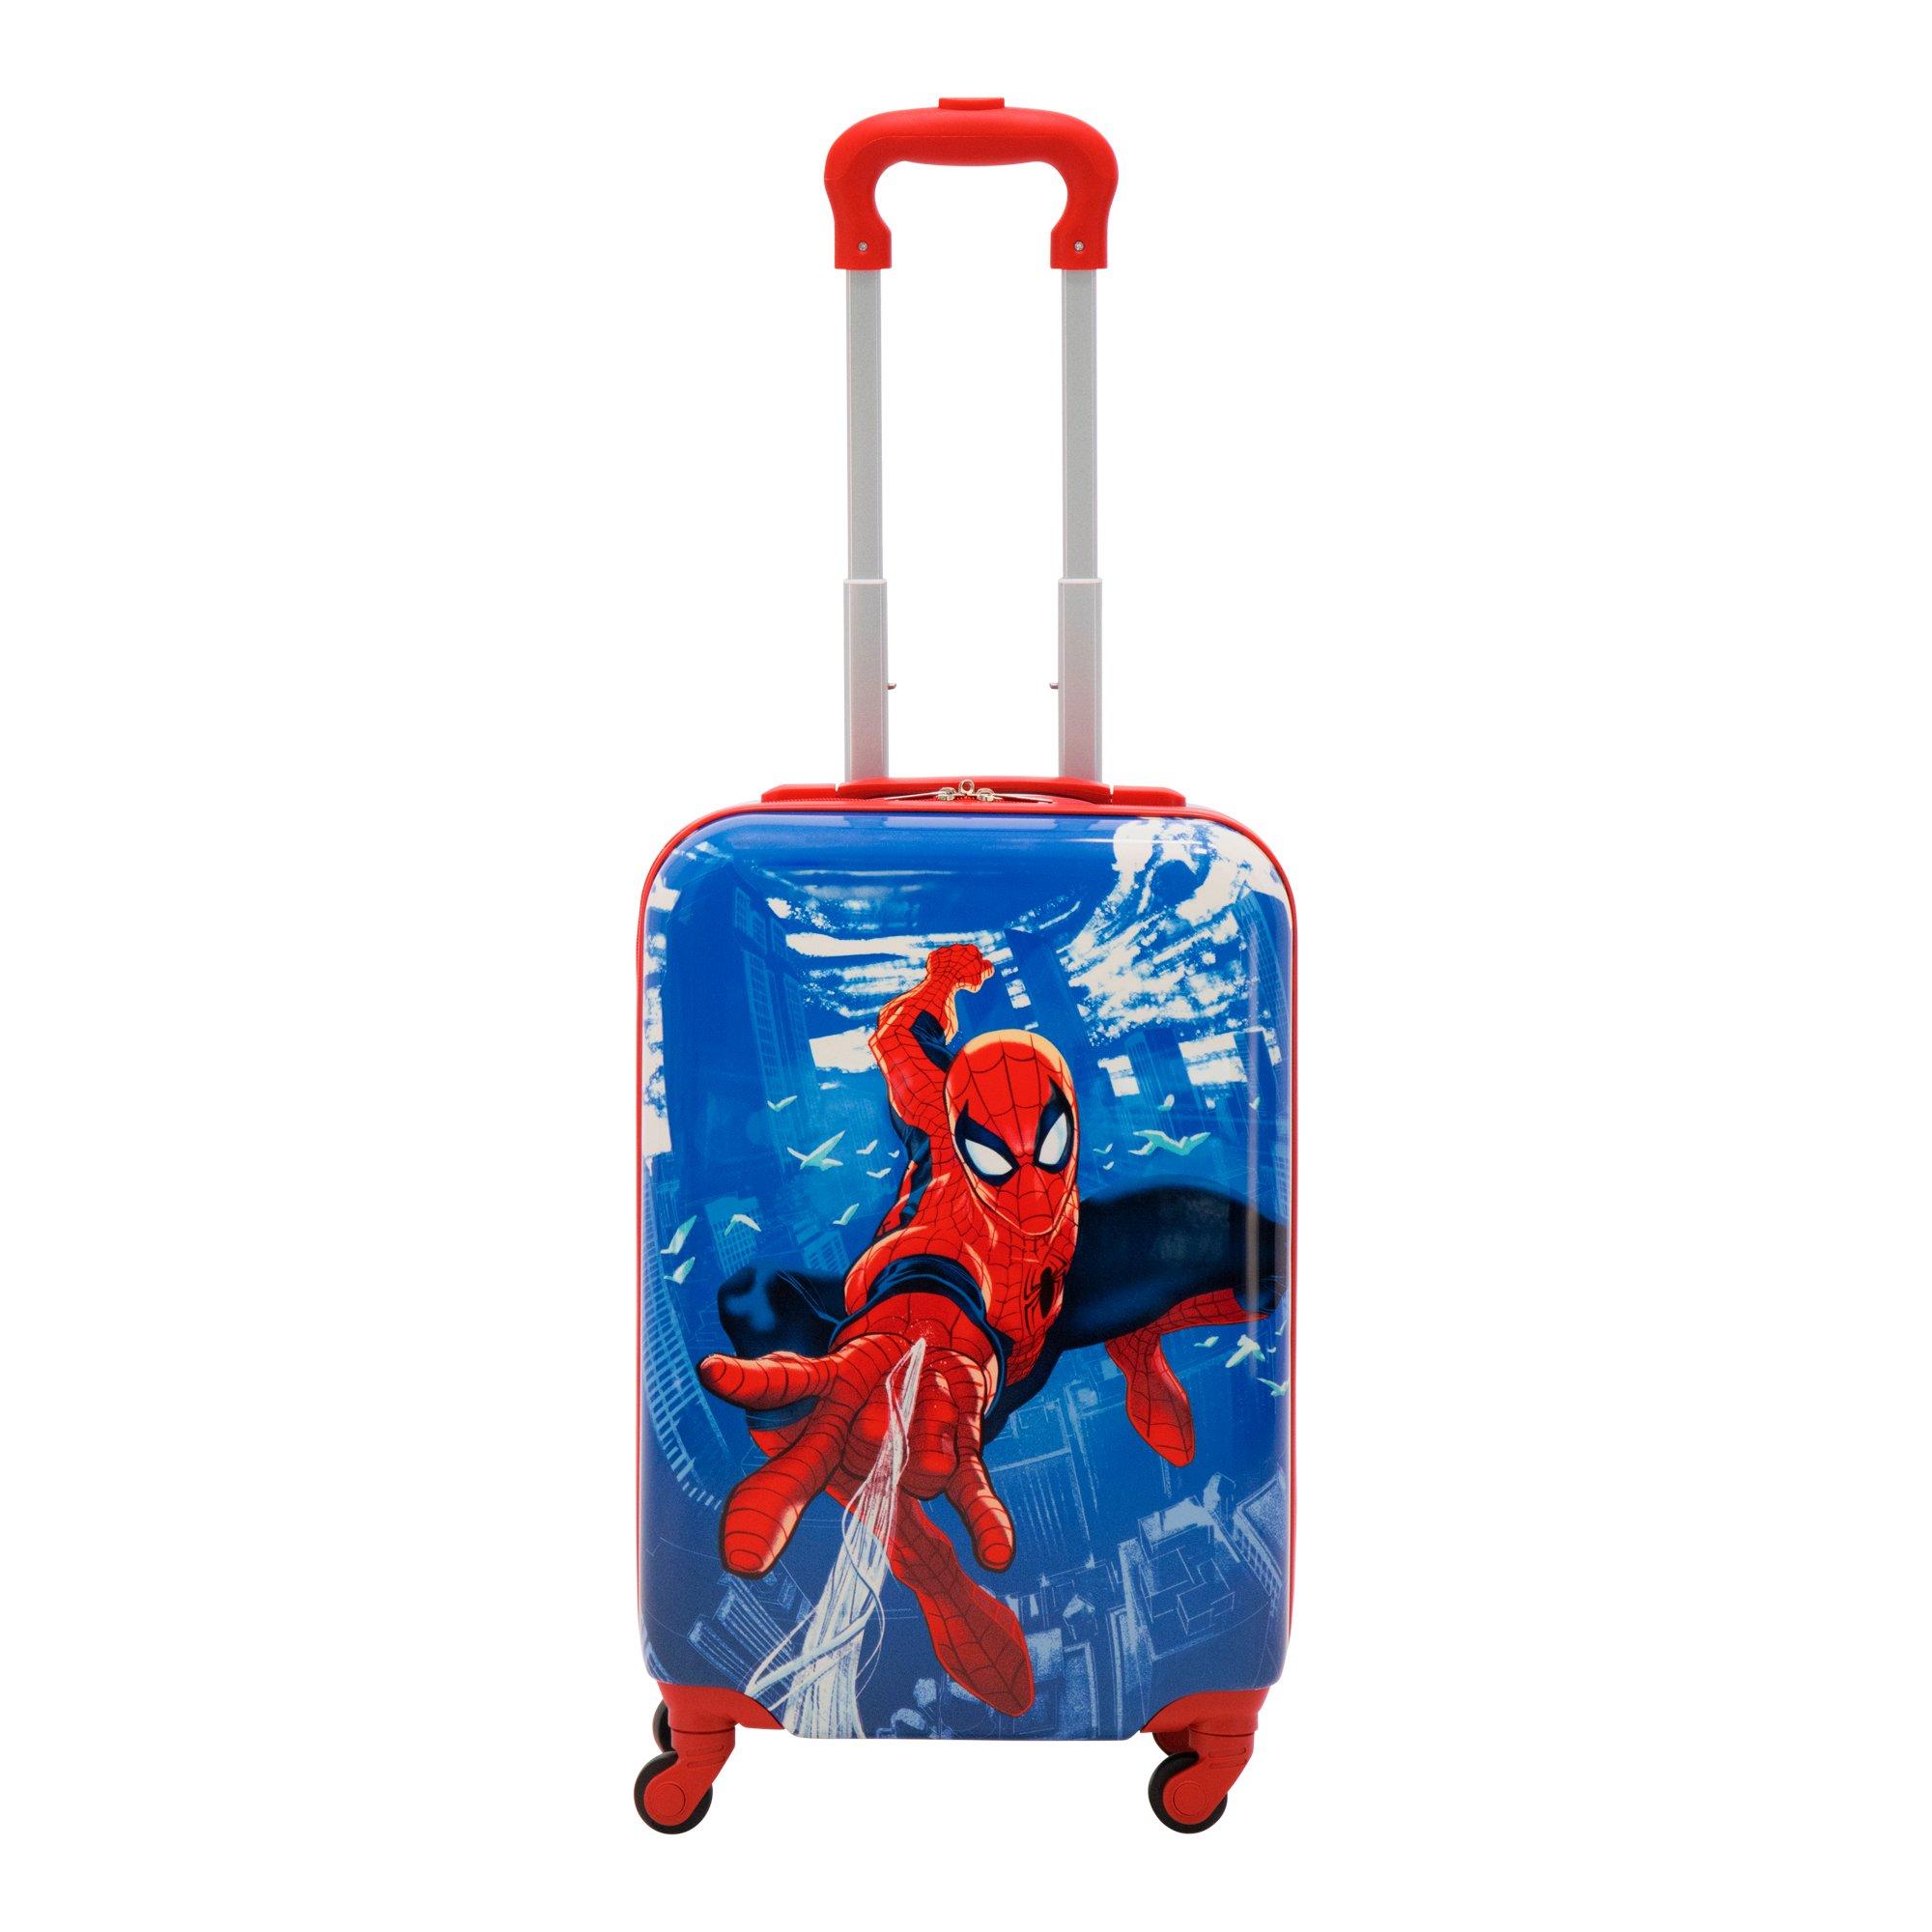 FUL Marvel Spiderman Web Slinging Kids 21-in Hard-Sided Carry-On Luggage